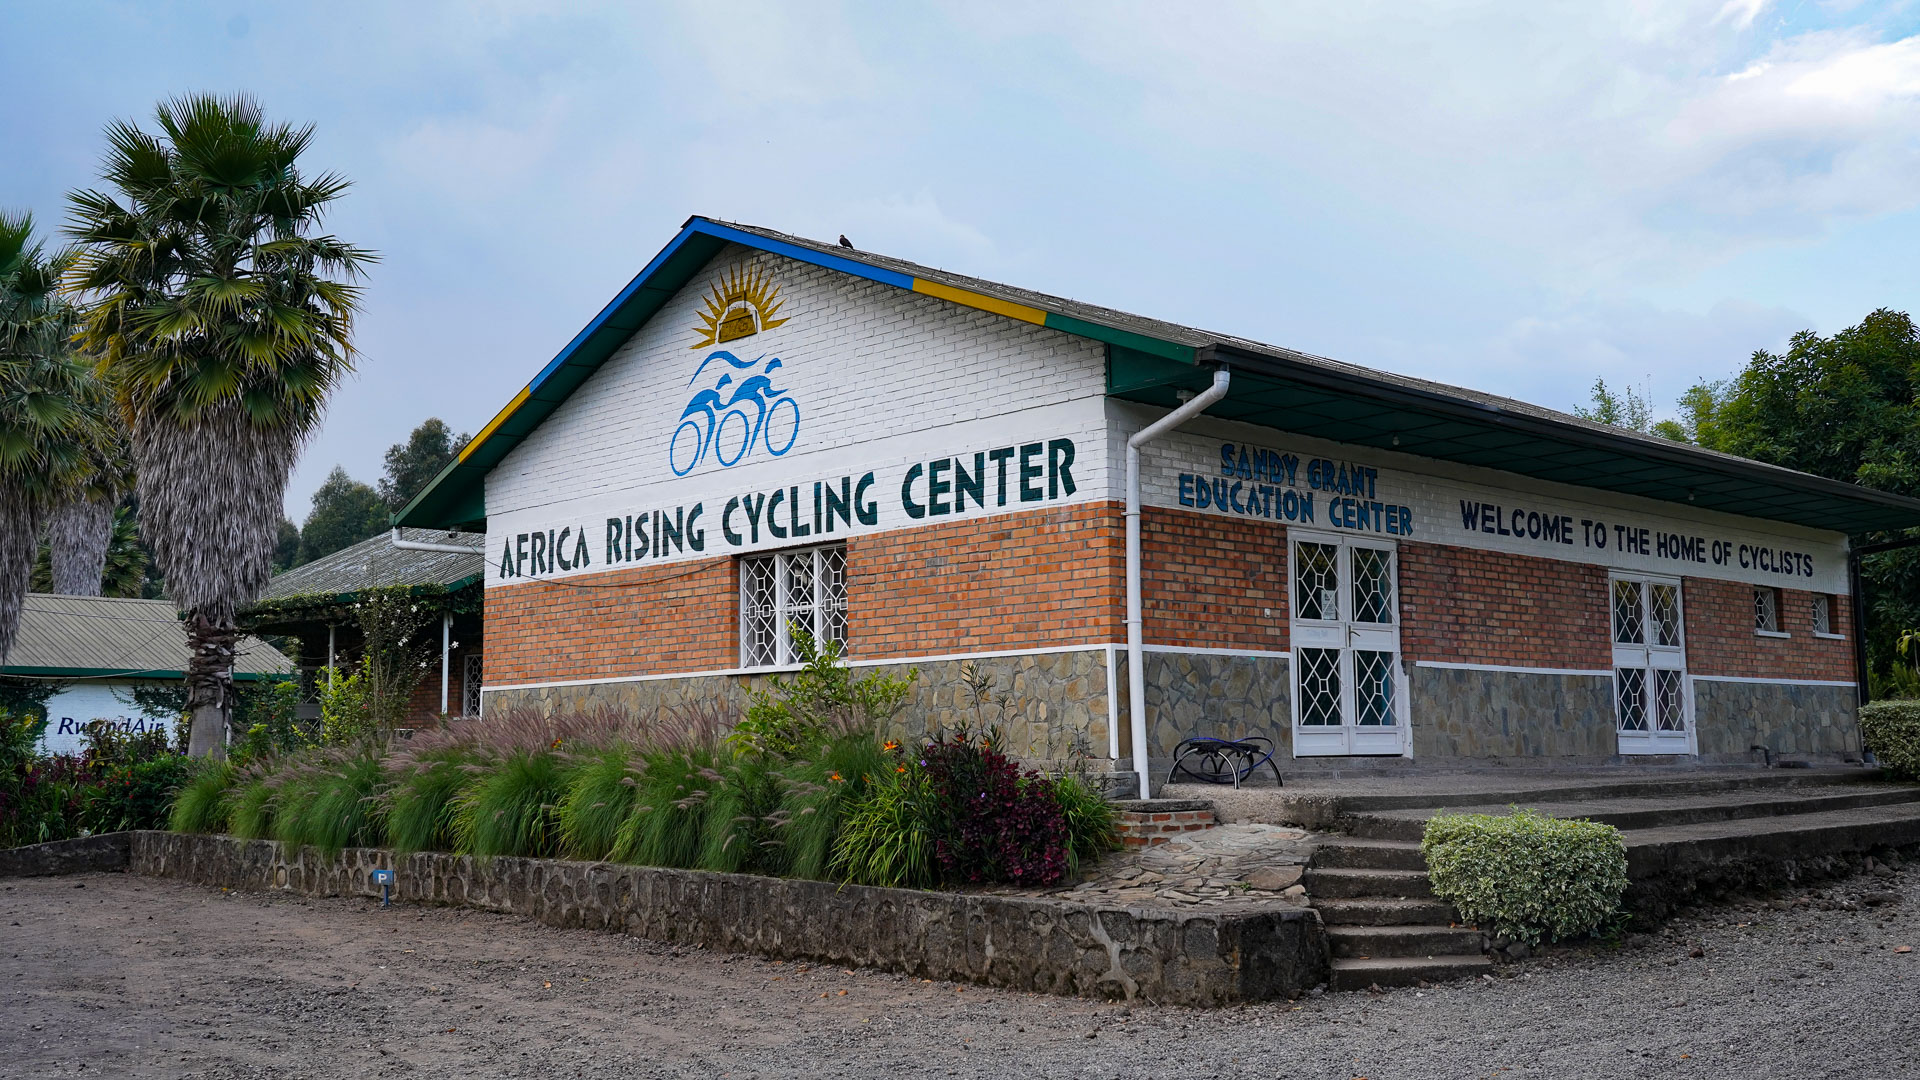 L'African Rising Cycling Center